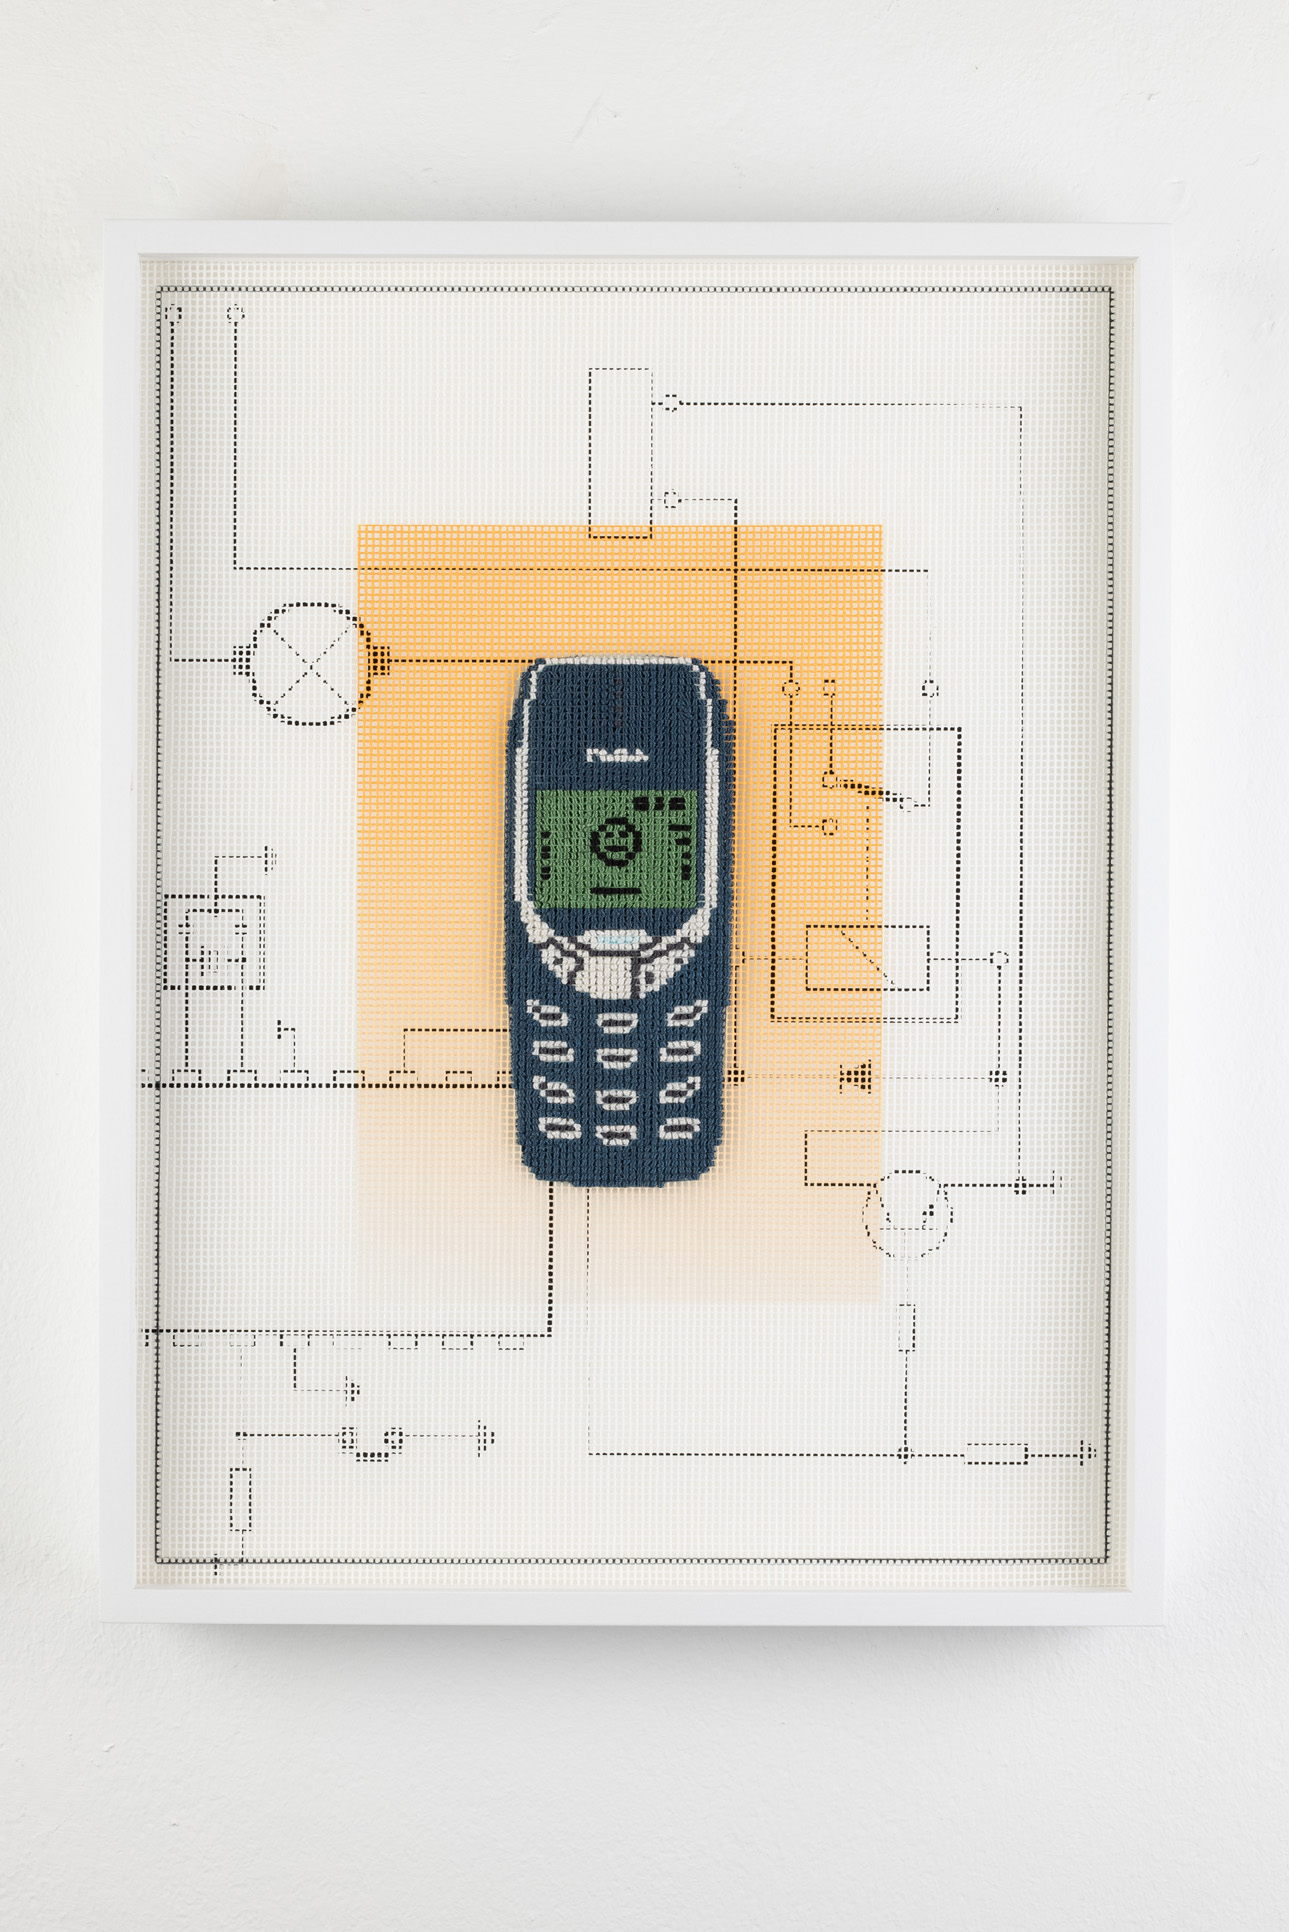 Early Digital Tech, Artifacts from The Age of Acceleration (Nokia 3310 Cellphone (2000)), 2021